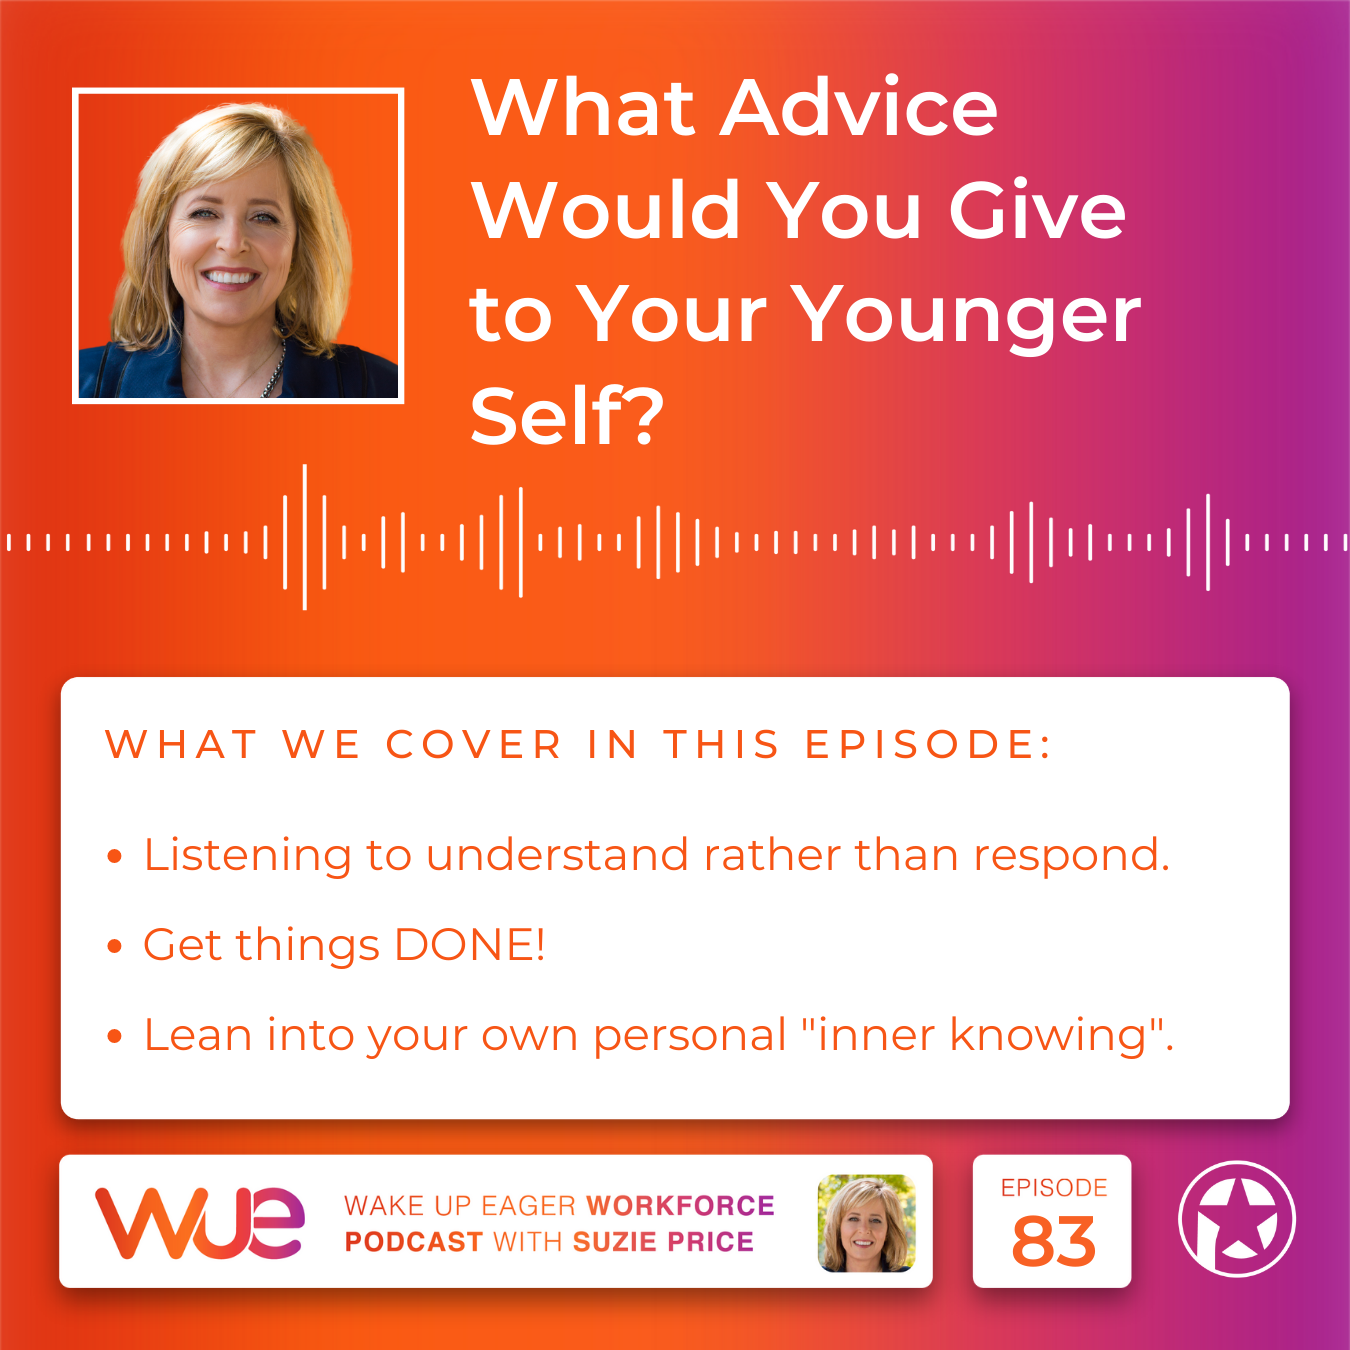 advice to your younger self